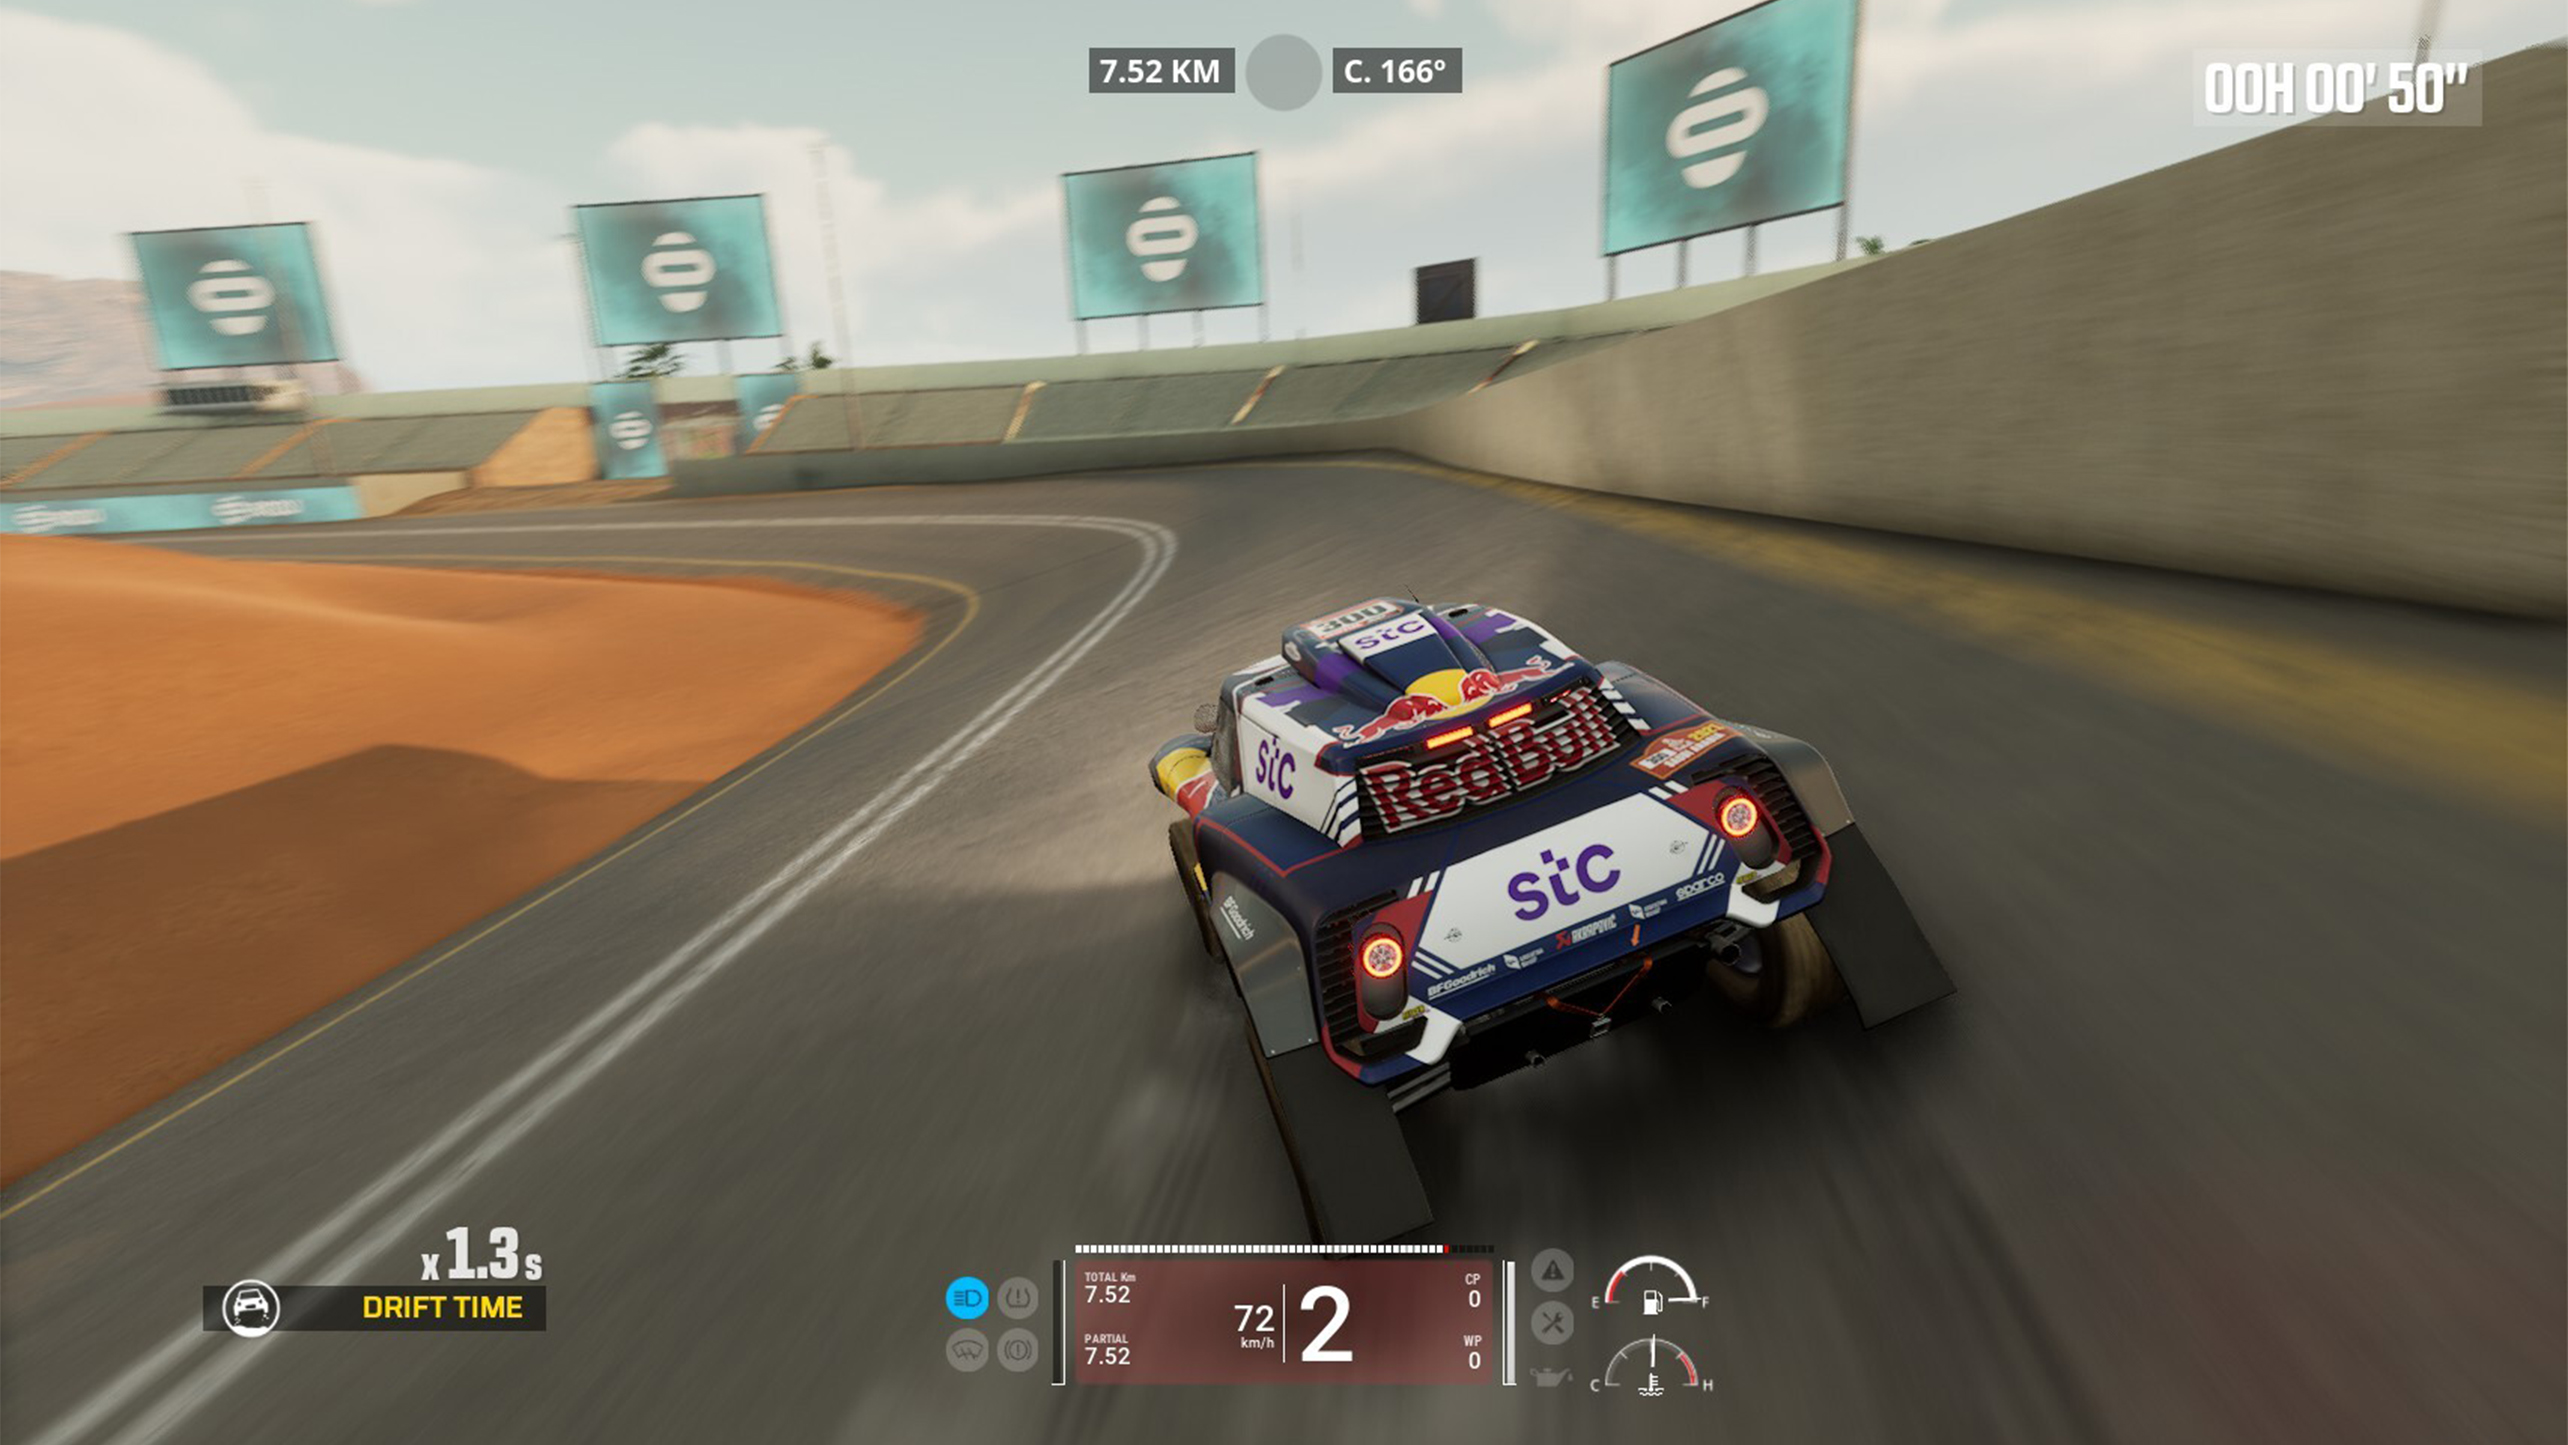 In game image showing car with Red Bull advertising on